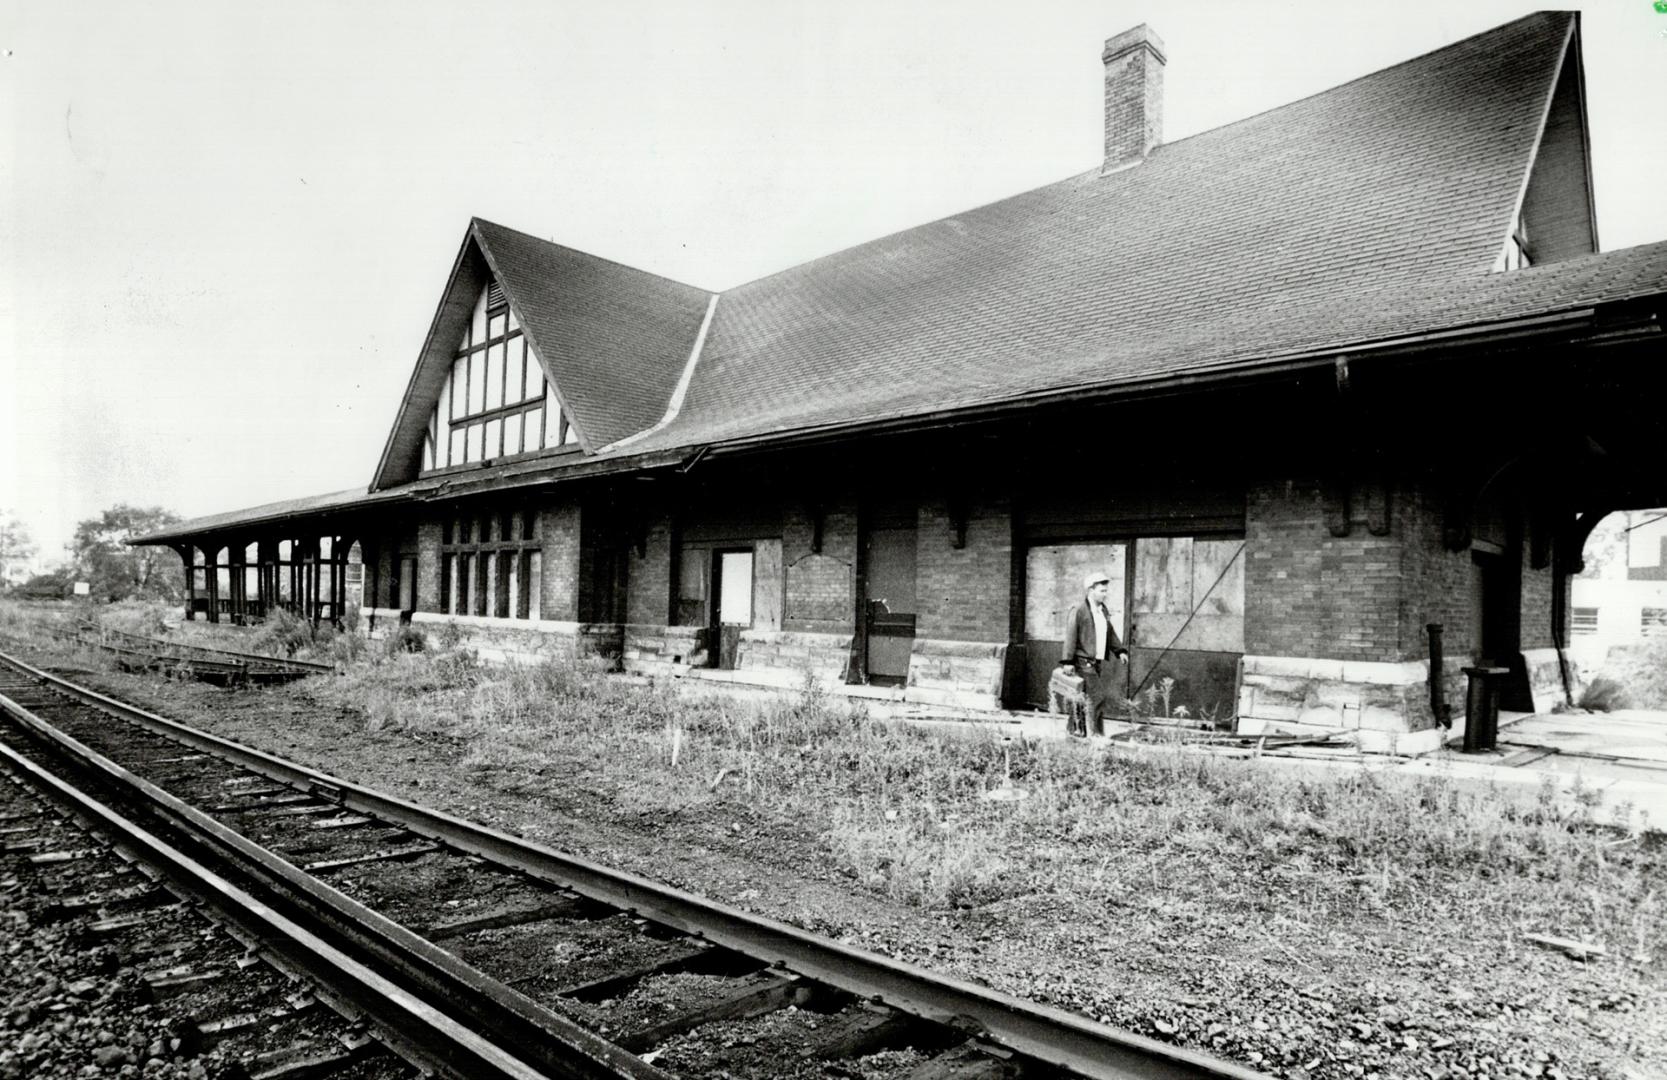 Farmers' market: The old West Toronto CP Railway station would become a farmers' market under the proposed $2-billion redevelopment